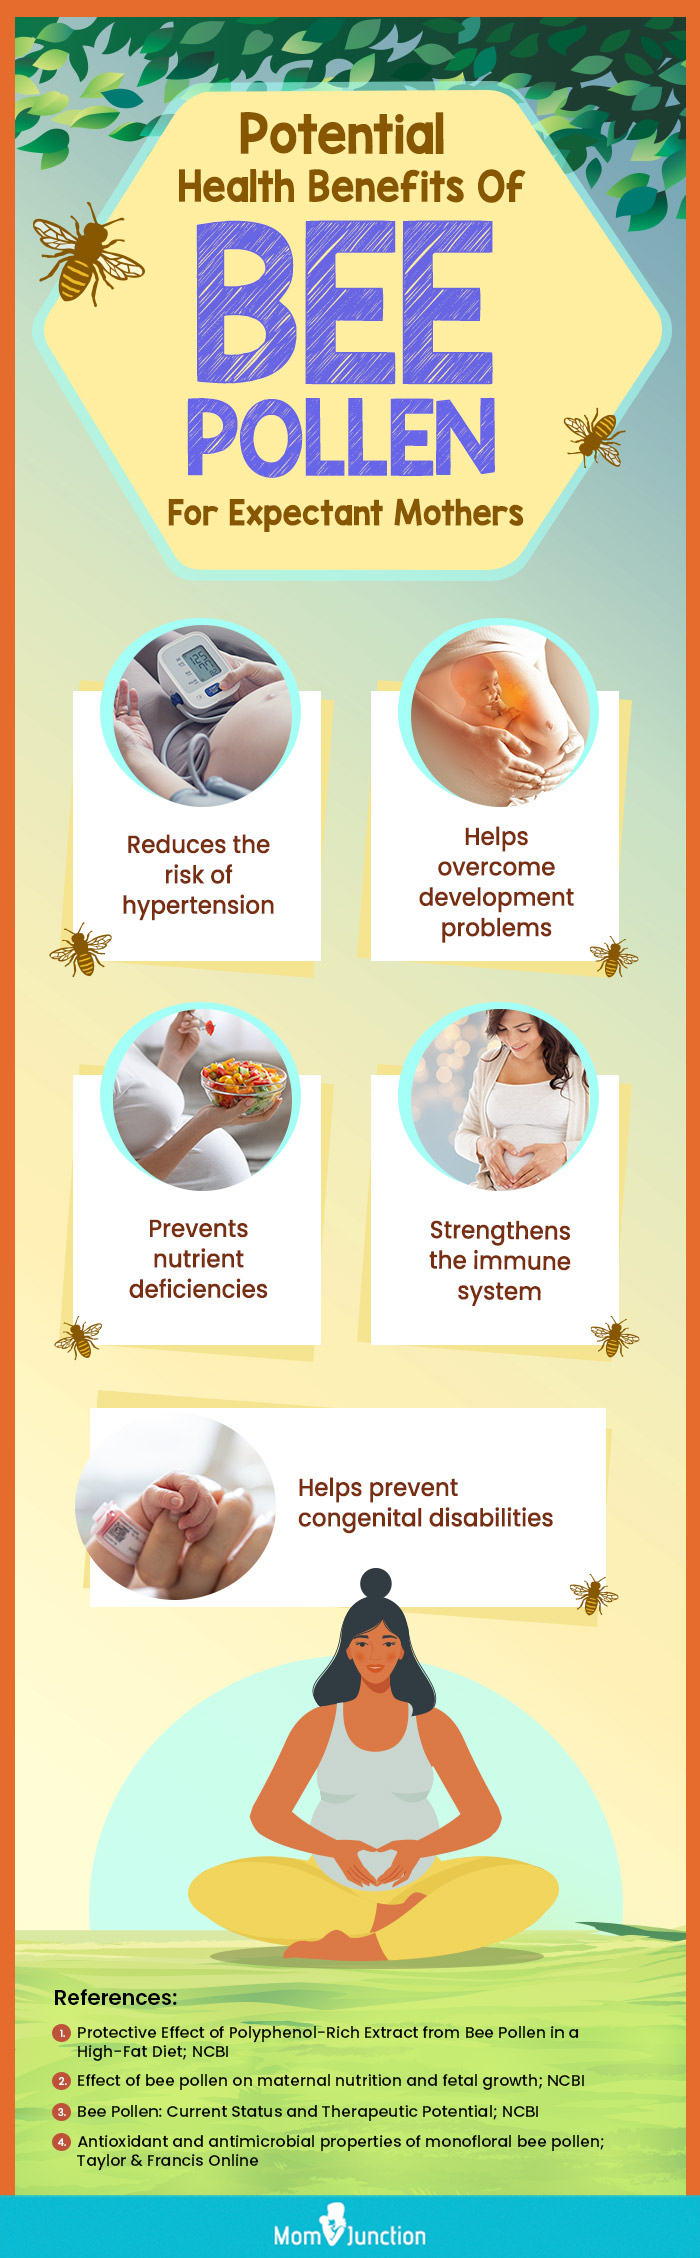 potential health benefits of bee pollen for expectant mothers (infographic)